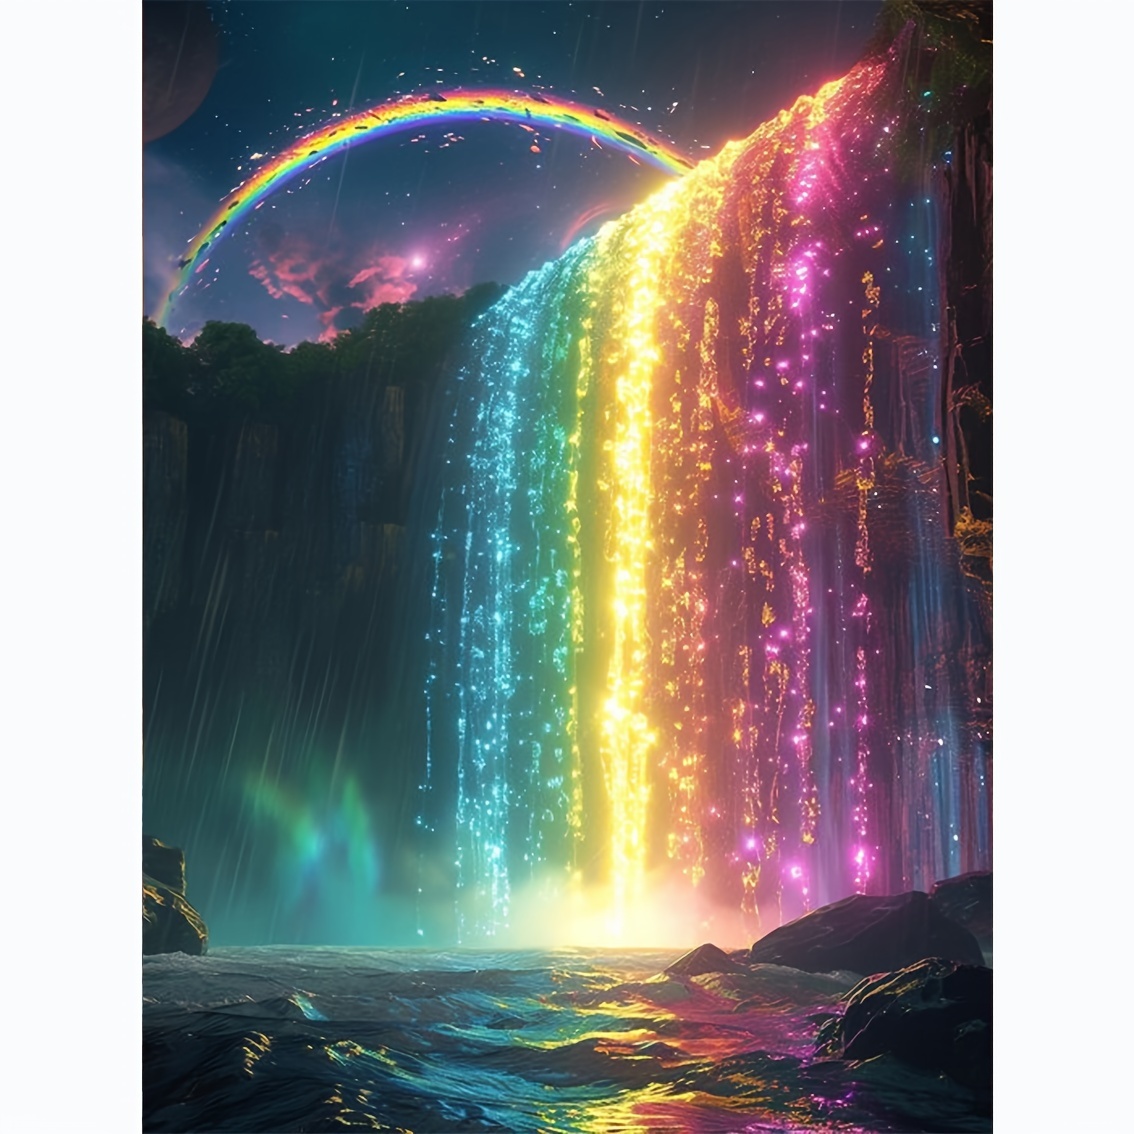 

Diy Diamond Painting Kit - Rainbow Waterfall Design, Round Diamonds, Canvas Material, Supplies For Beginners, Frameless 12x16 Inches